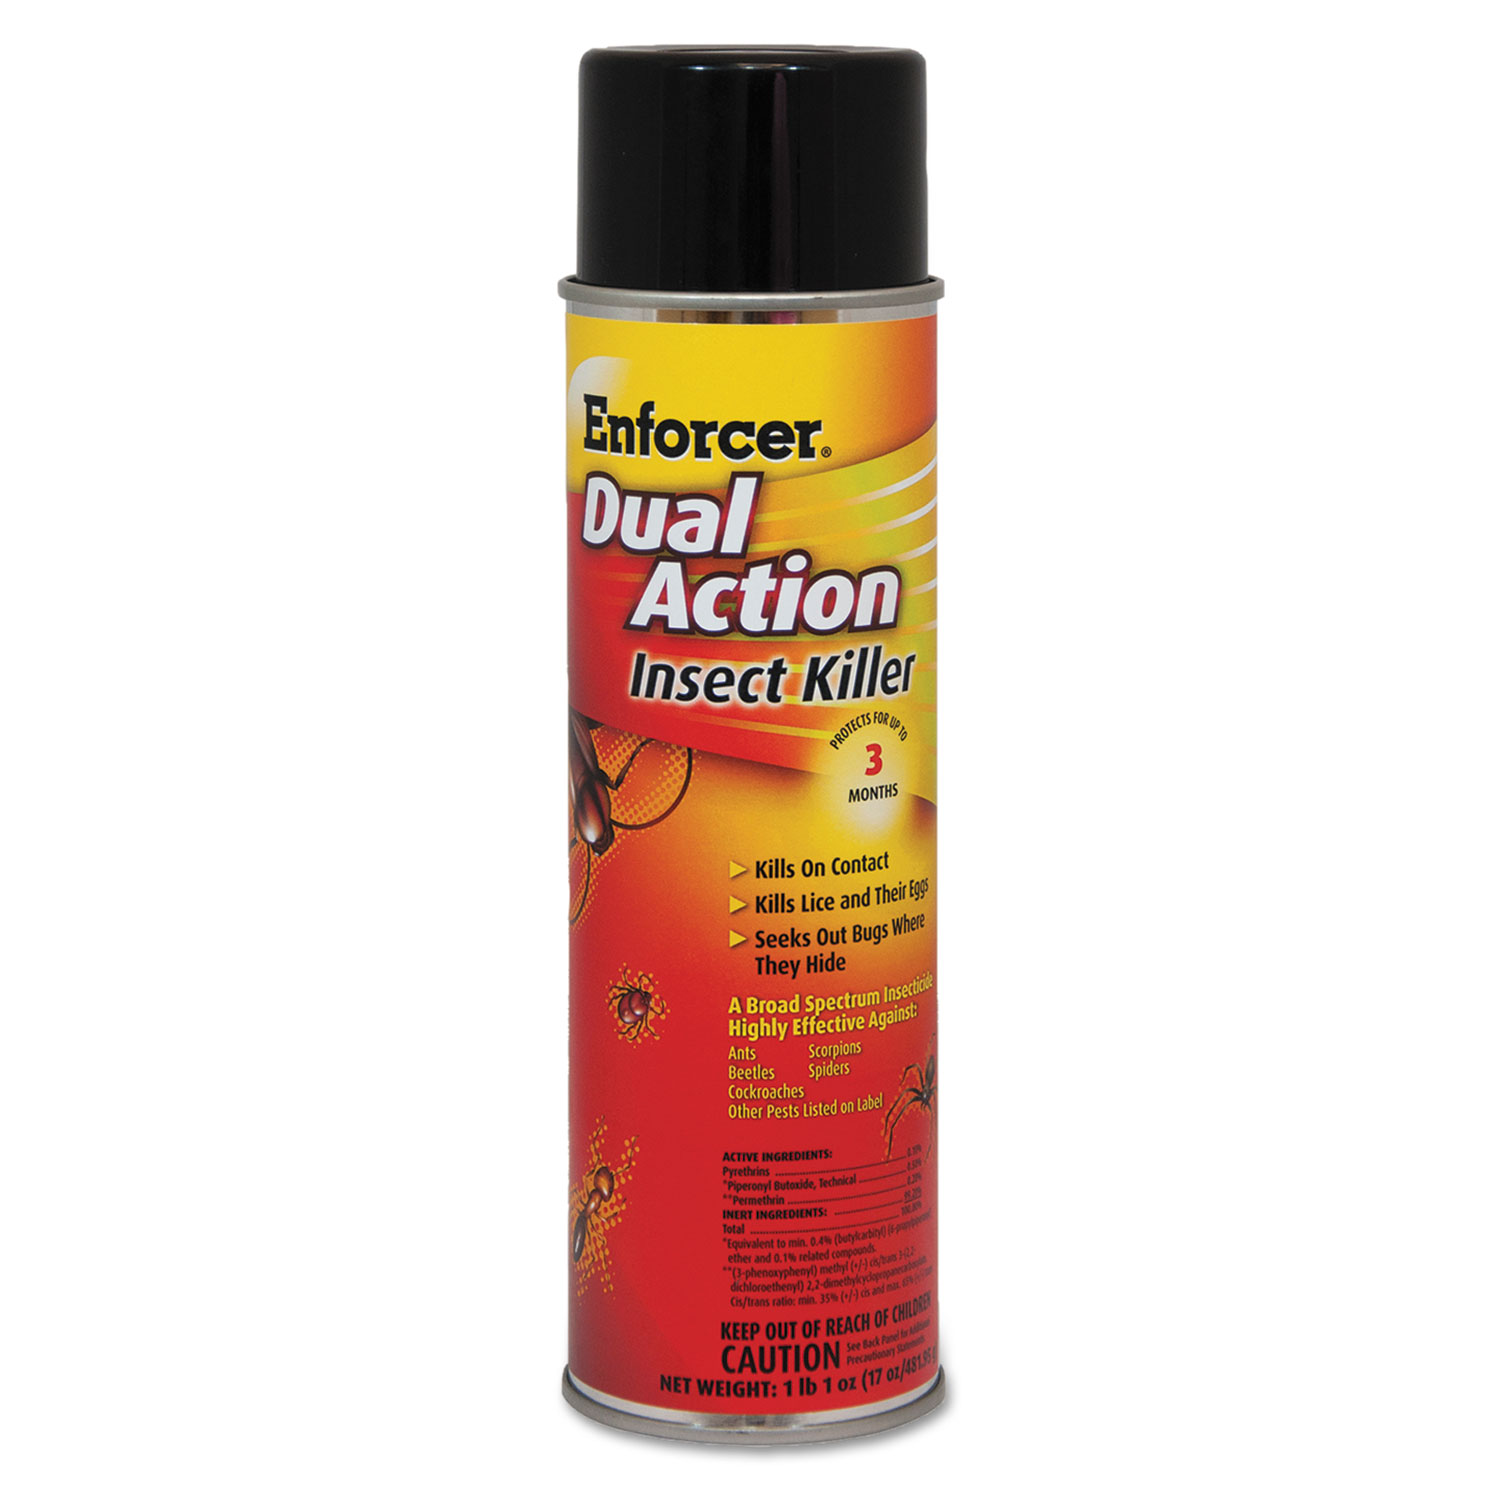 Dual Action Insect Killer, For Flying/Crawling Insects, 17 oz Aerosol